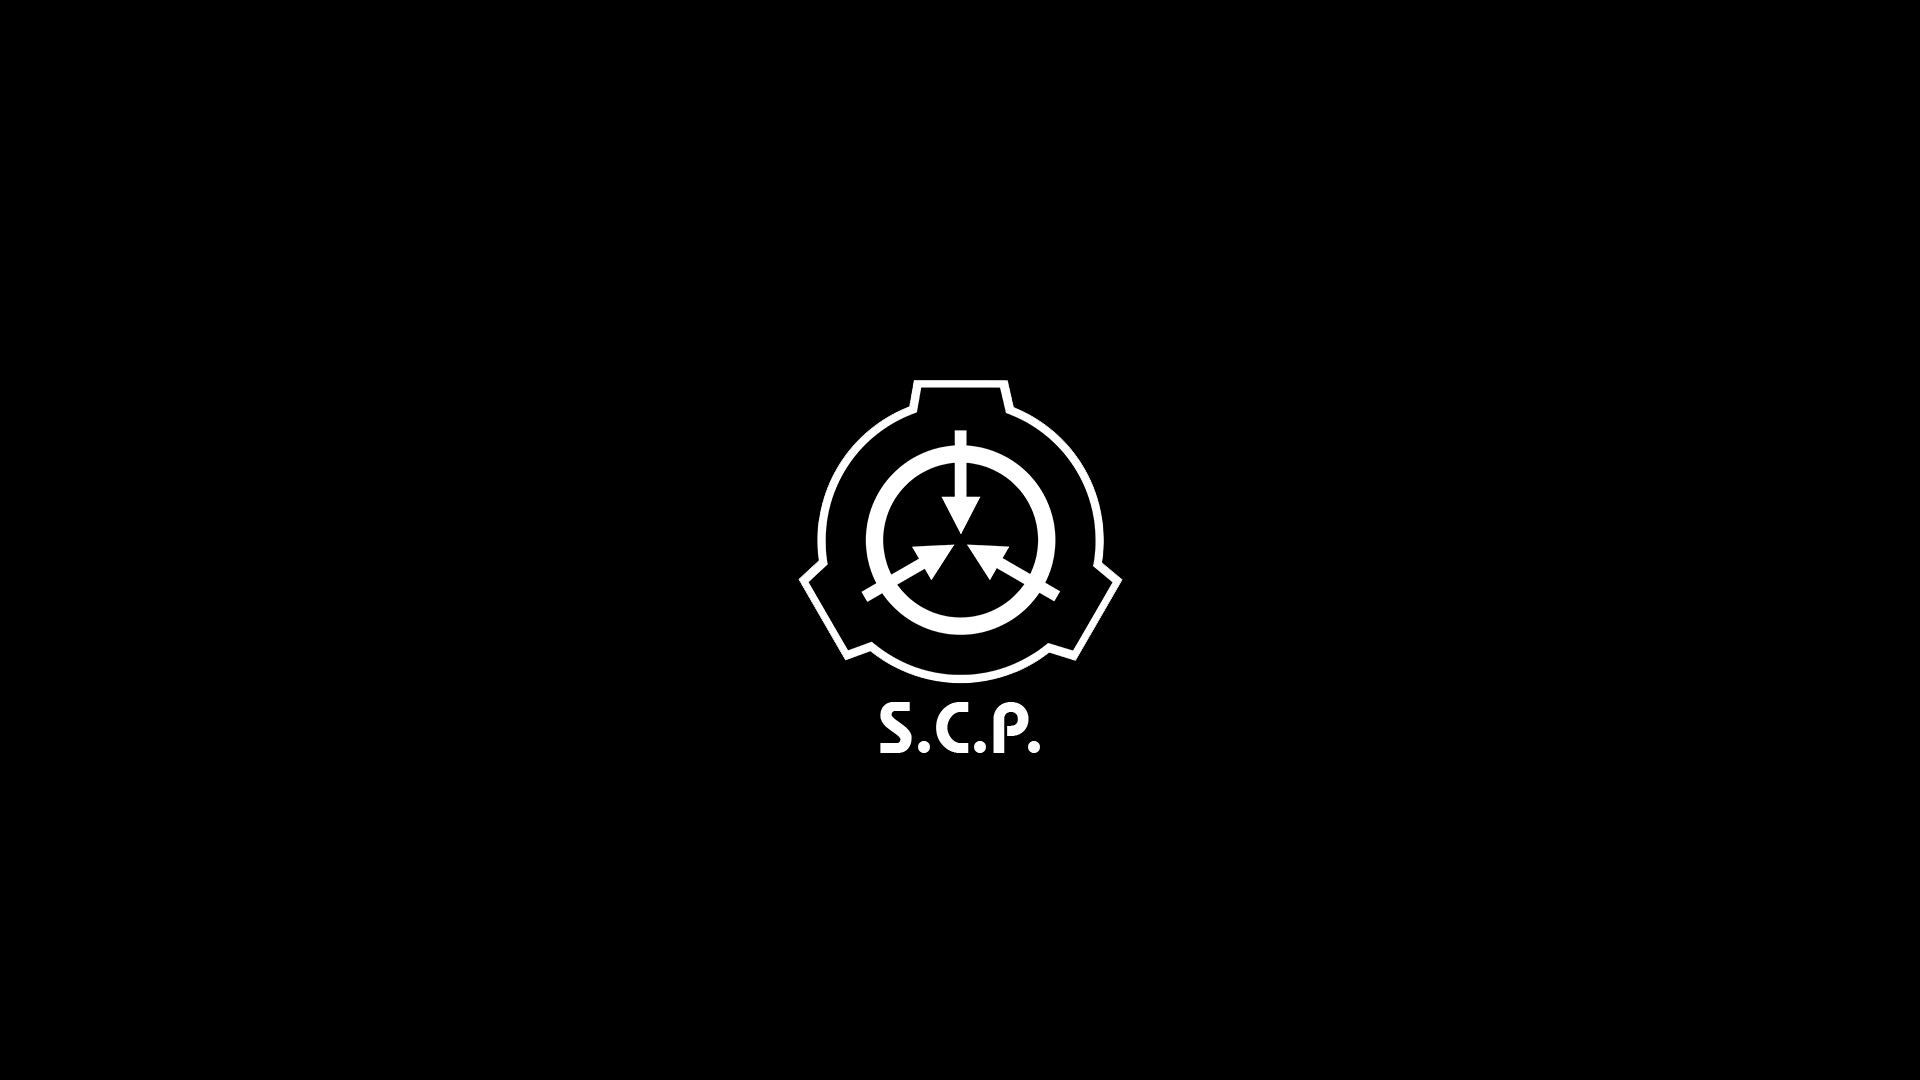 An Extremely Simple Wallpaper For The Foundation 1920x1080p Scp